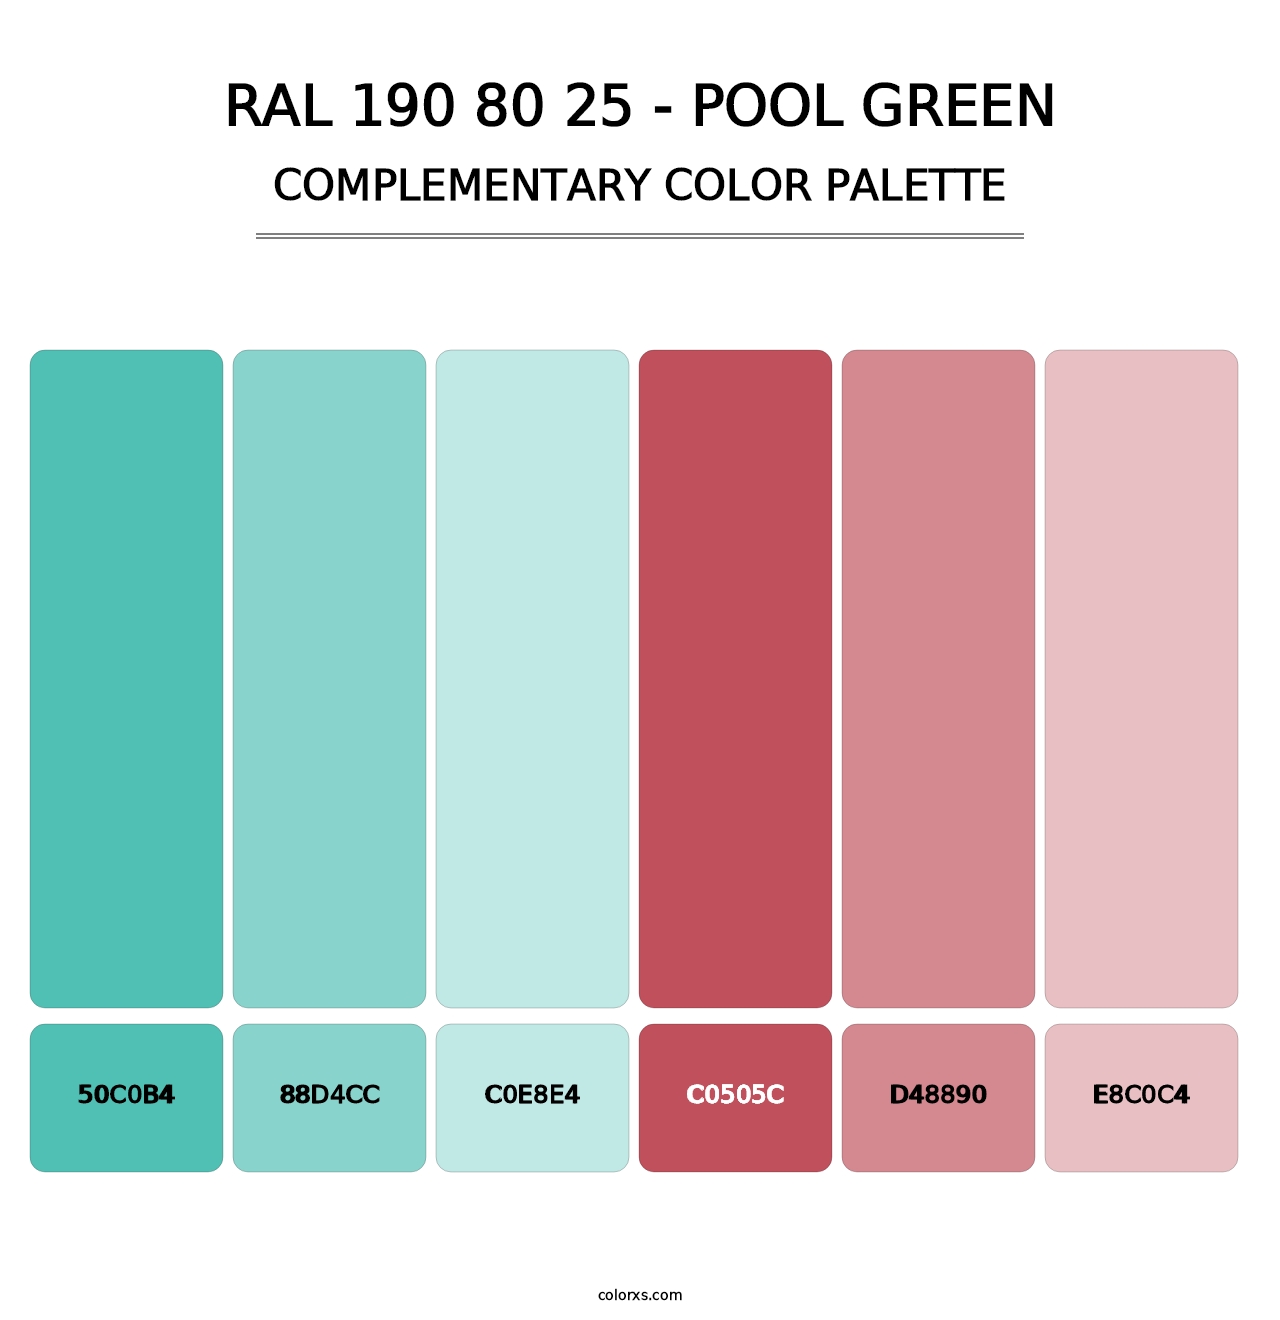 RAL 190 80 25 - Pool Green - Complementary Color Palette